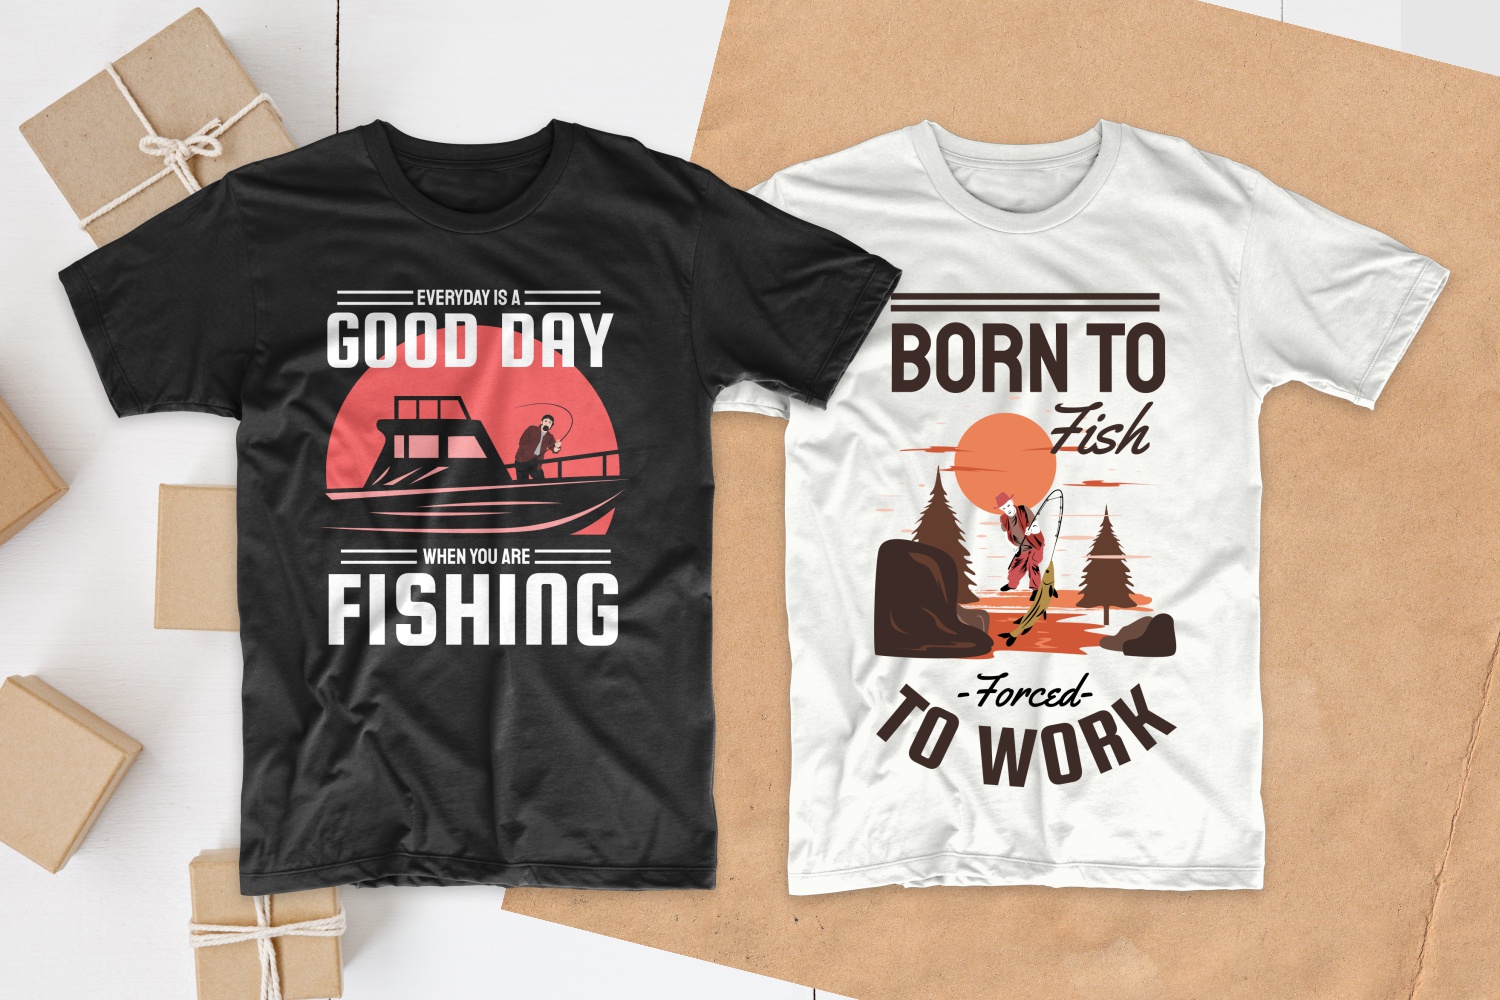 Black and white T-shirts featuring fishermen.